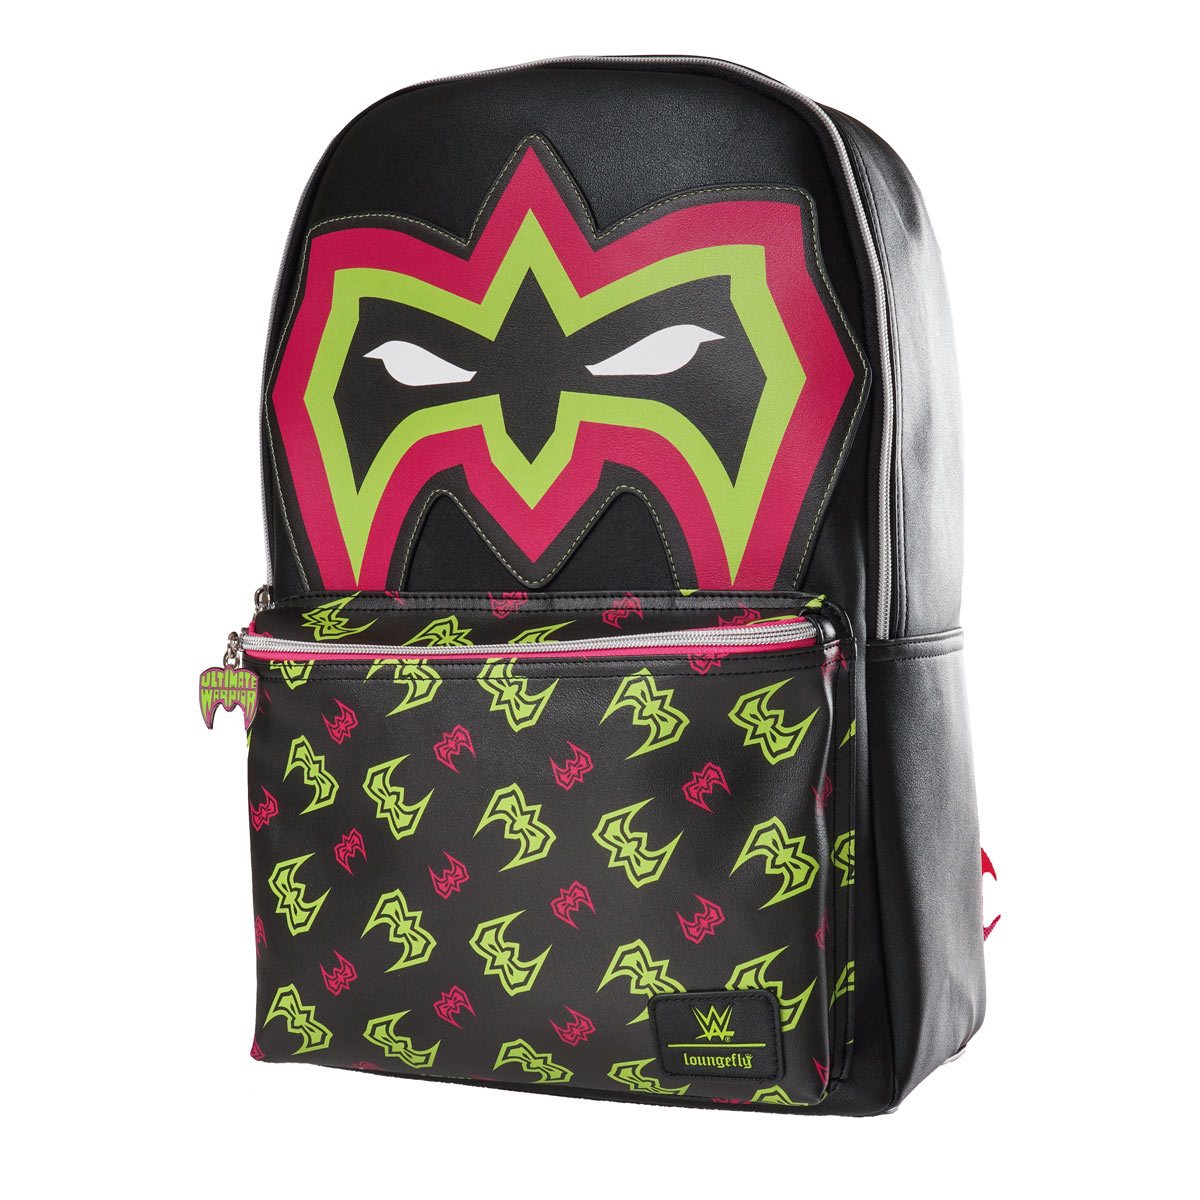 WWE Ultimate Warrior Backpack - Entertainment Earth Exclusive